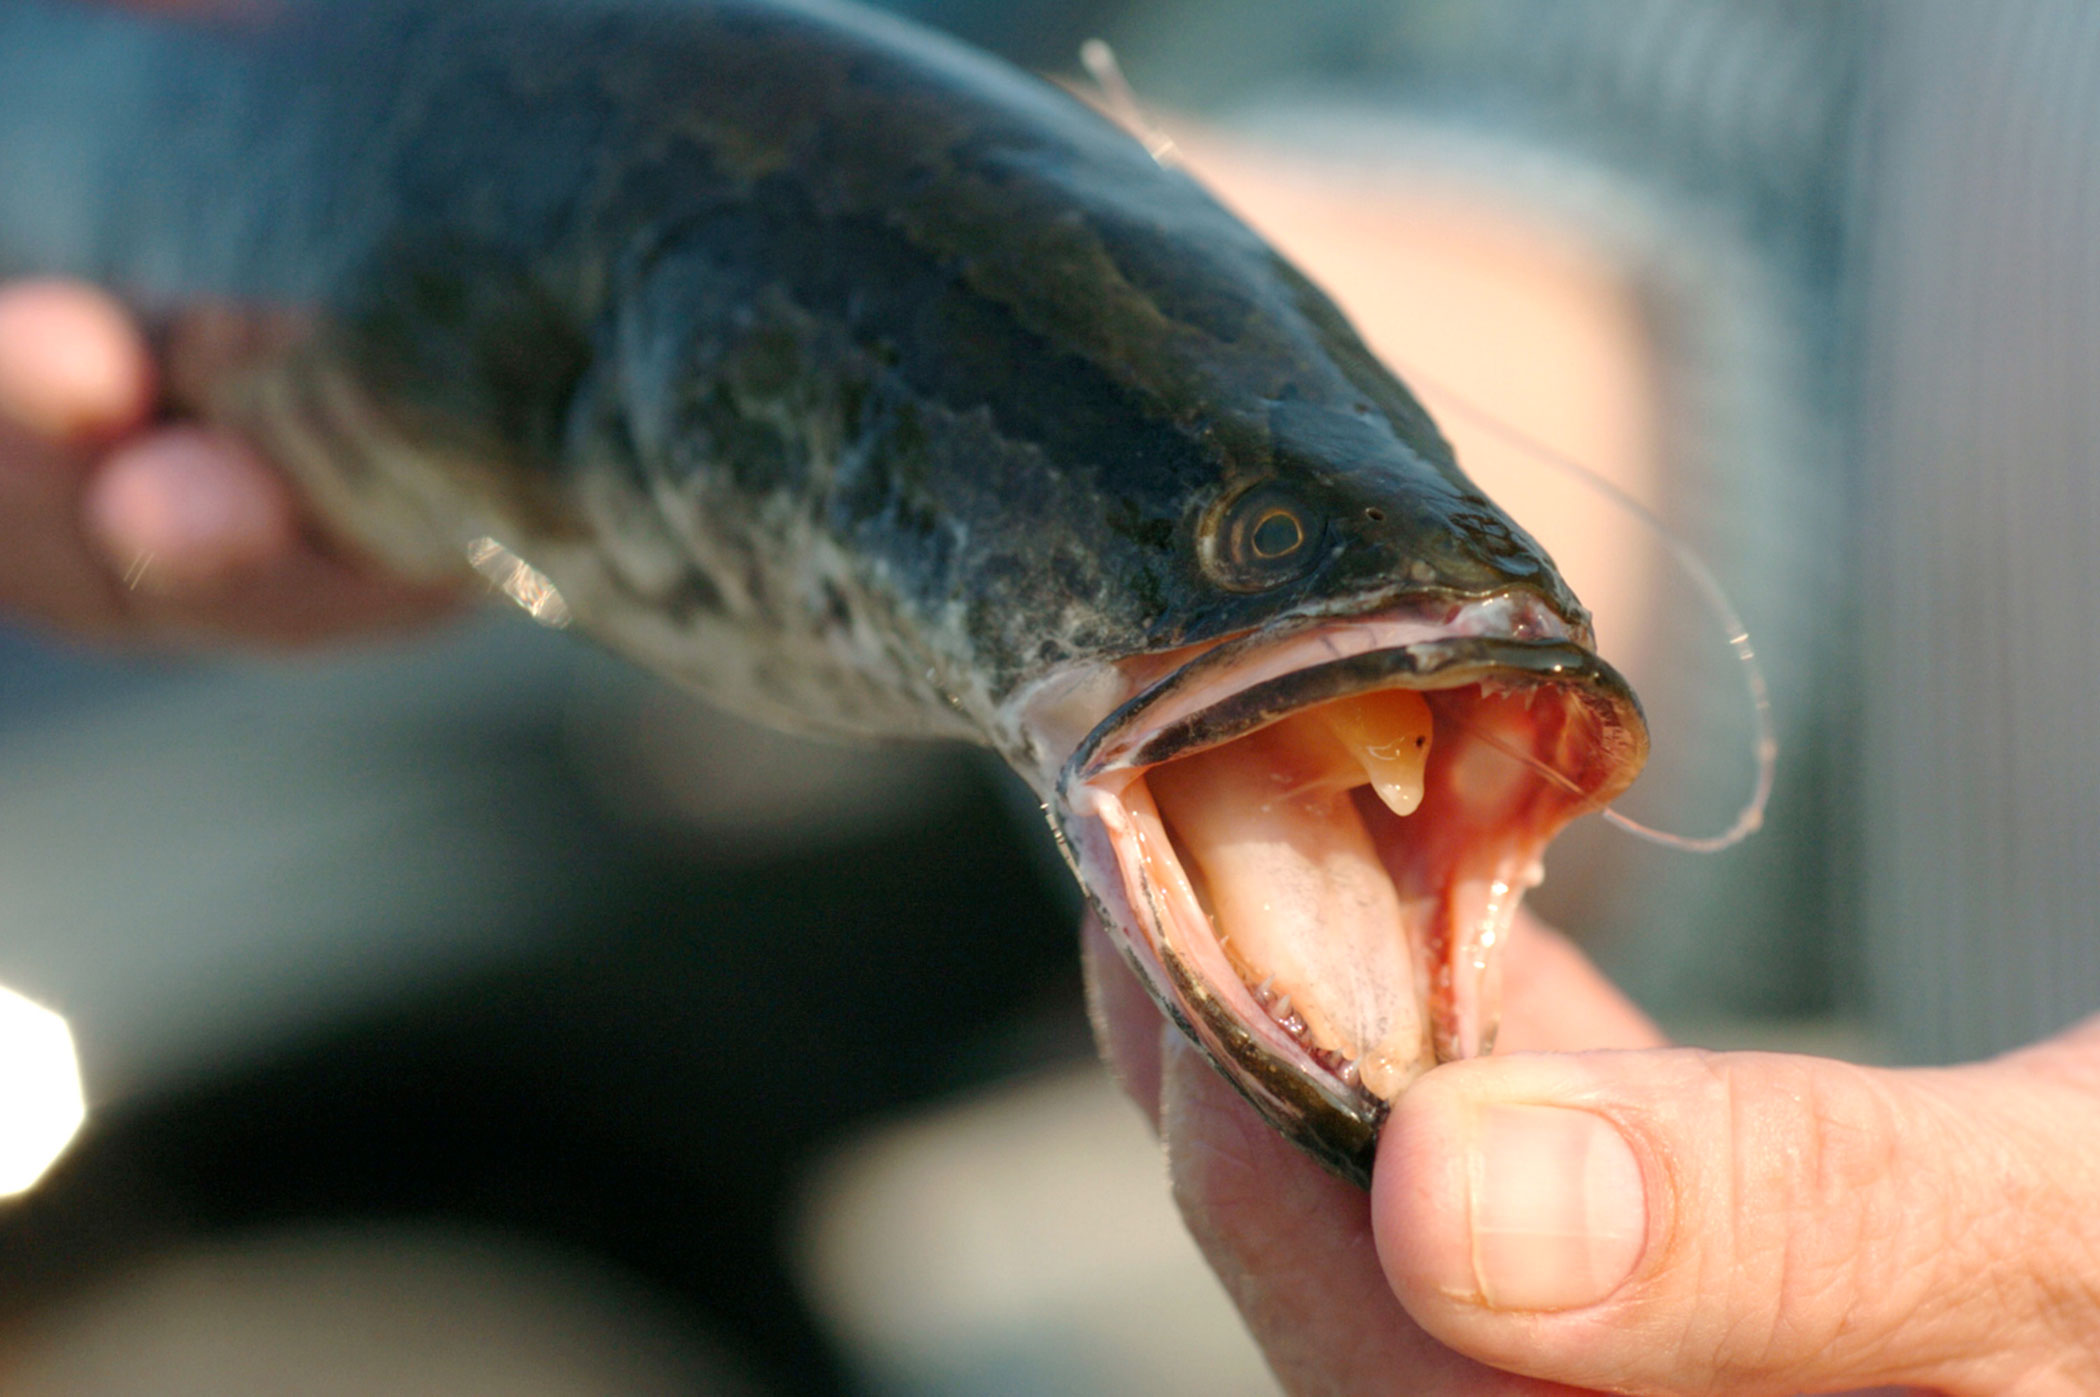 The northern snakehead fish has teeth like a shark and the ability to walk on land. The carnivorous fish hails from Asia but in 2002 it appeared in a small Maryland town, where it promptly obliterated wildlife in the local pond. While other invasive fish species can only travel as far as the waterways will take them, the snakehead, sometimes called "Fishzilla," can survive for up to four days out of the water and travels across land by wiggling its body back and forth like a snake. The fish has since been spotted everywhere from New York to California.